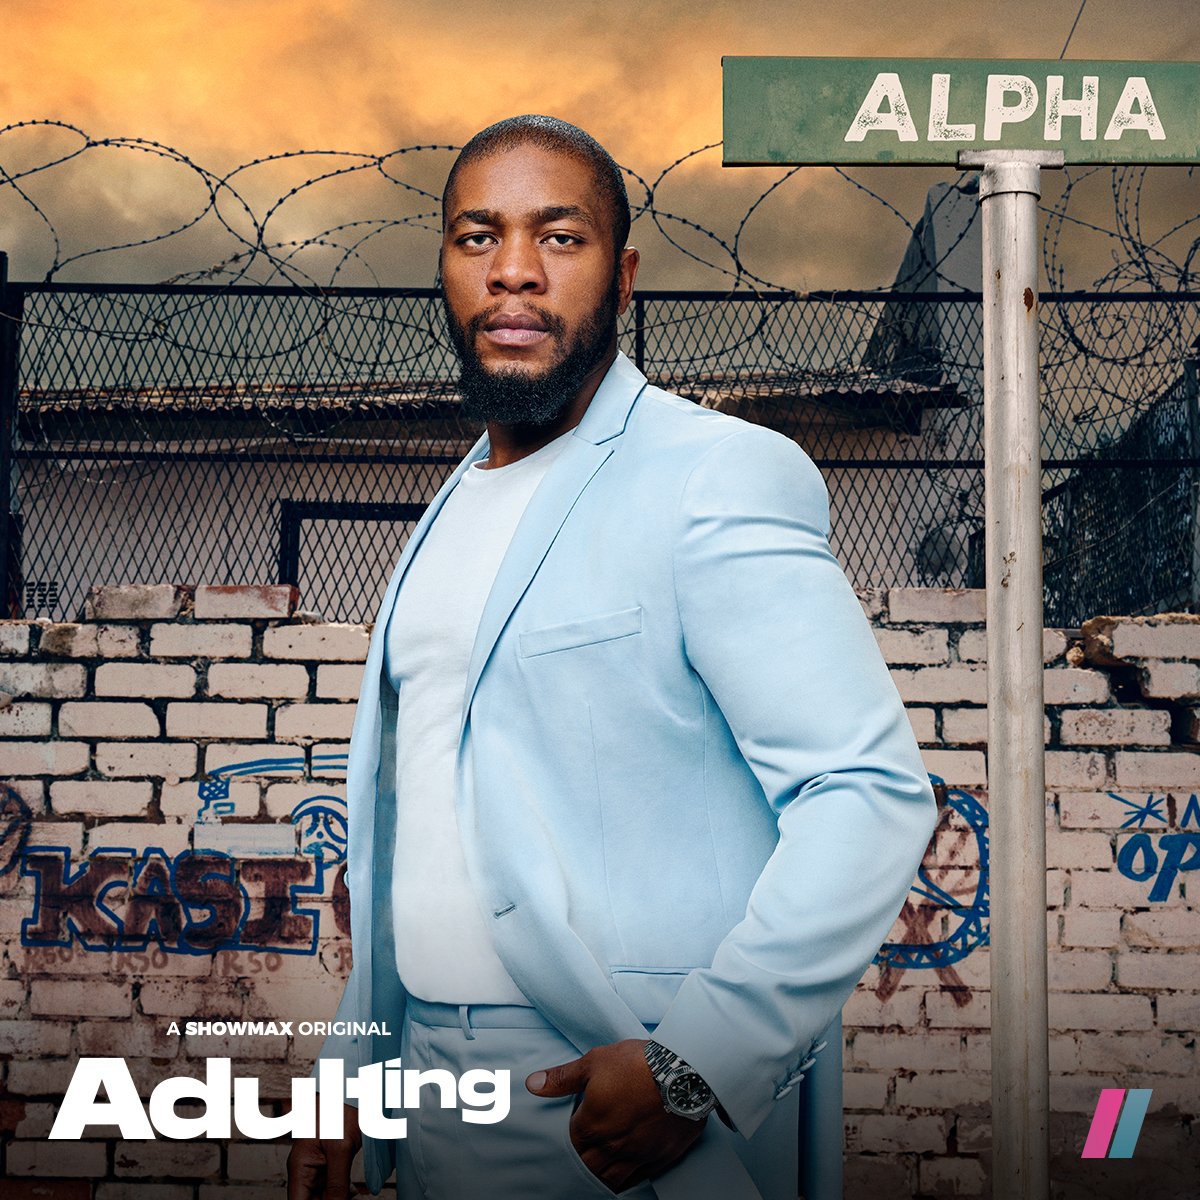 Showmax Teases Upcoming South African Series Adulting Afrocritik 6102